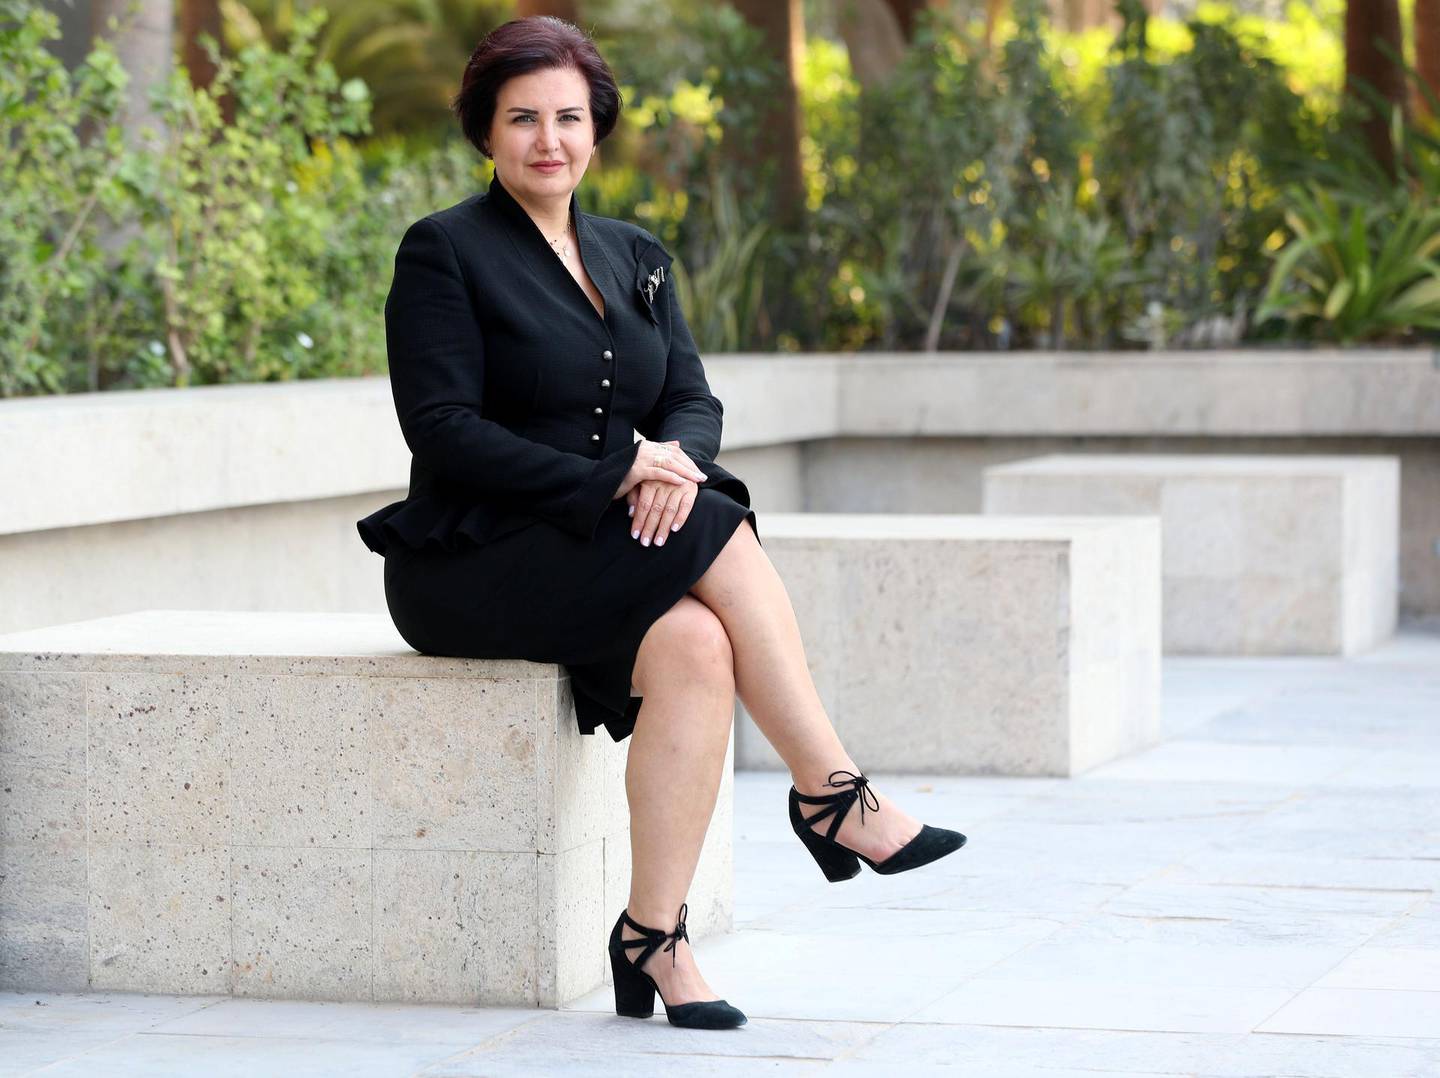 Dubai, United Arab Emirates - October 21, 2019: Dr Nairouz Bader has founded Corporate HERoes, focused on getting more women in leadership positions and helping them develop their skills and gain experience. She wants more women to break down the barriers faced in the region and get into high level business positions in the UAE. Monday the 21st of October 2019. Media City, Dubai. Chris Whiteoak / The National